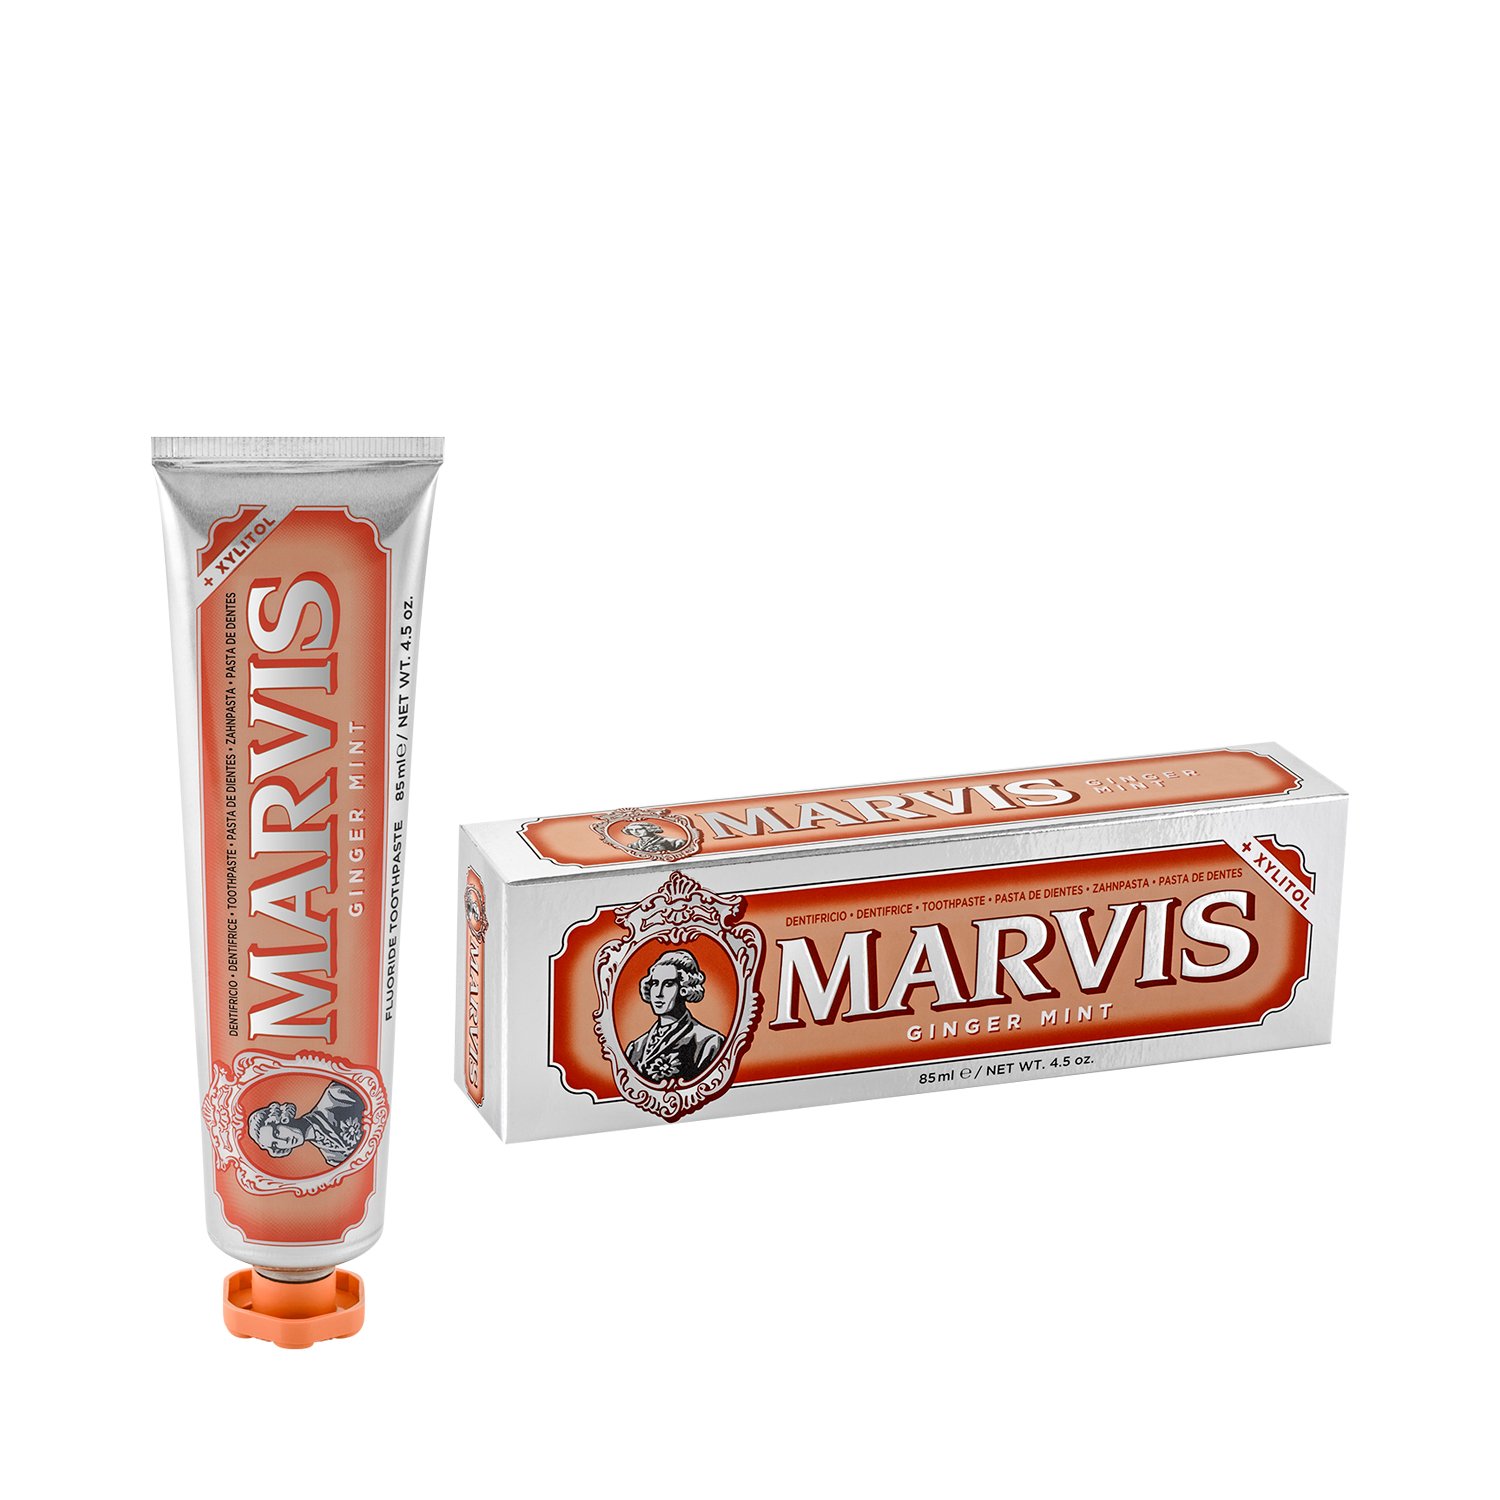 Marvis - Ginger Mint - Zahncreme